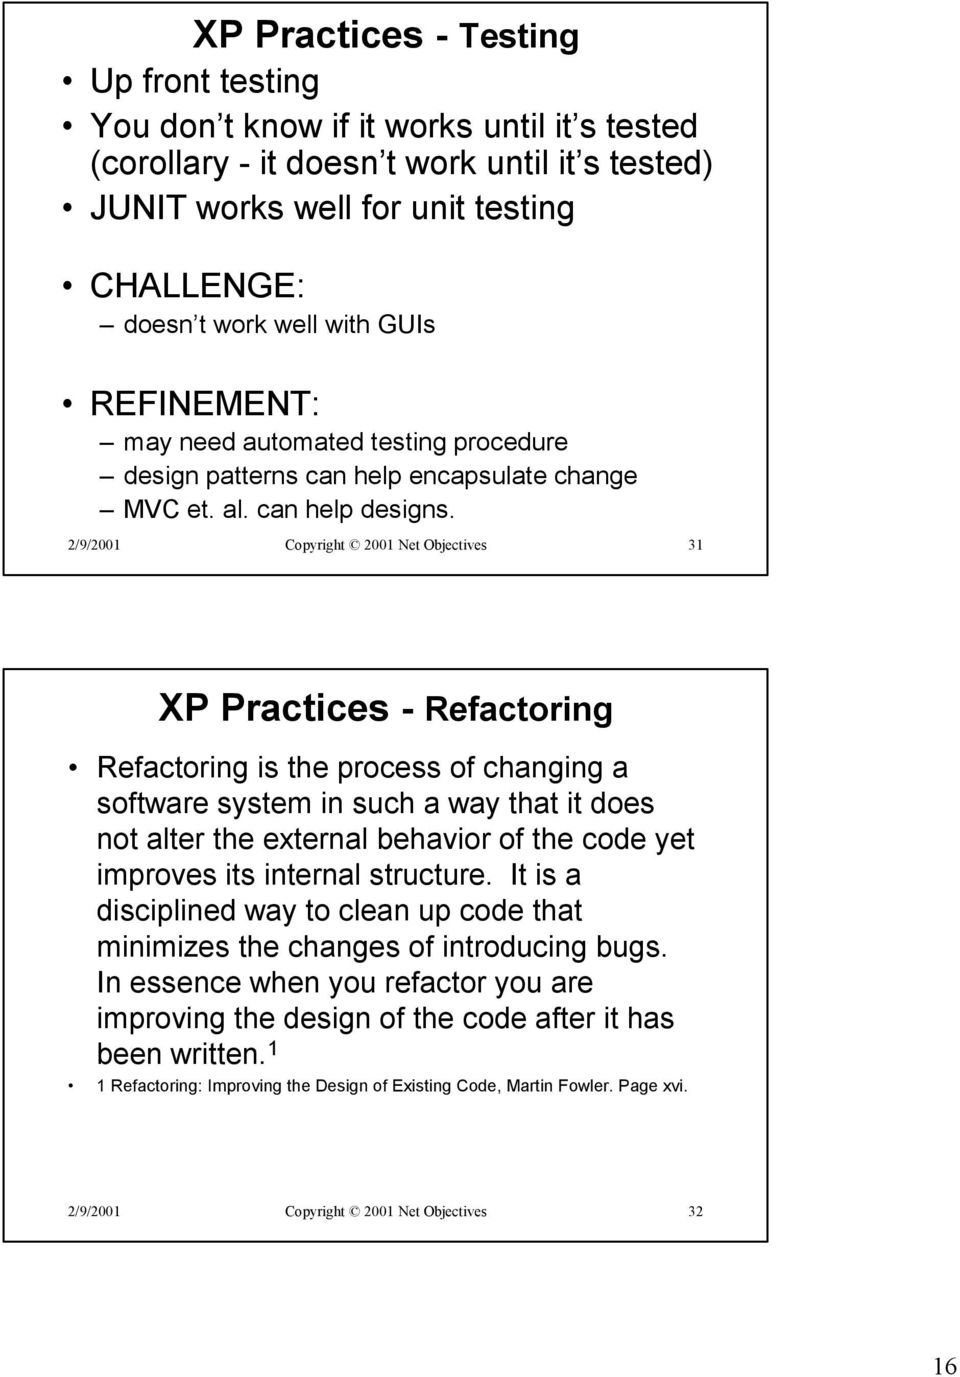 2/9/2001 Copyright 2001 Net Objectives 31 XP Practices - Refactoring Refactoring is the process of changing a software system in such a way that it does not alter the external behavior of the code